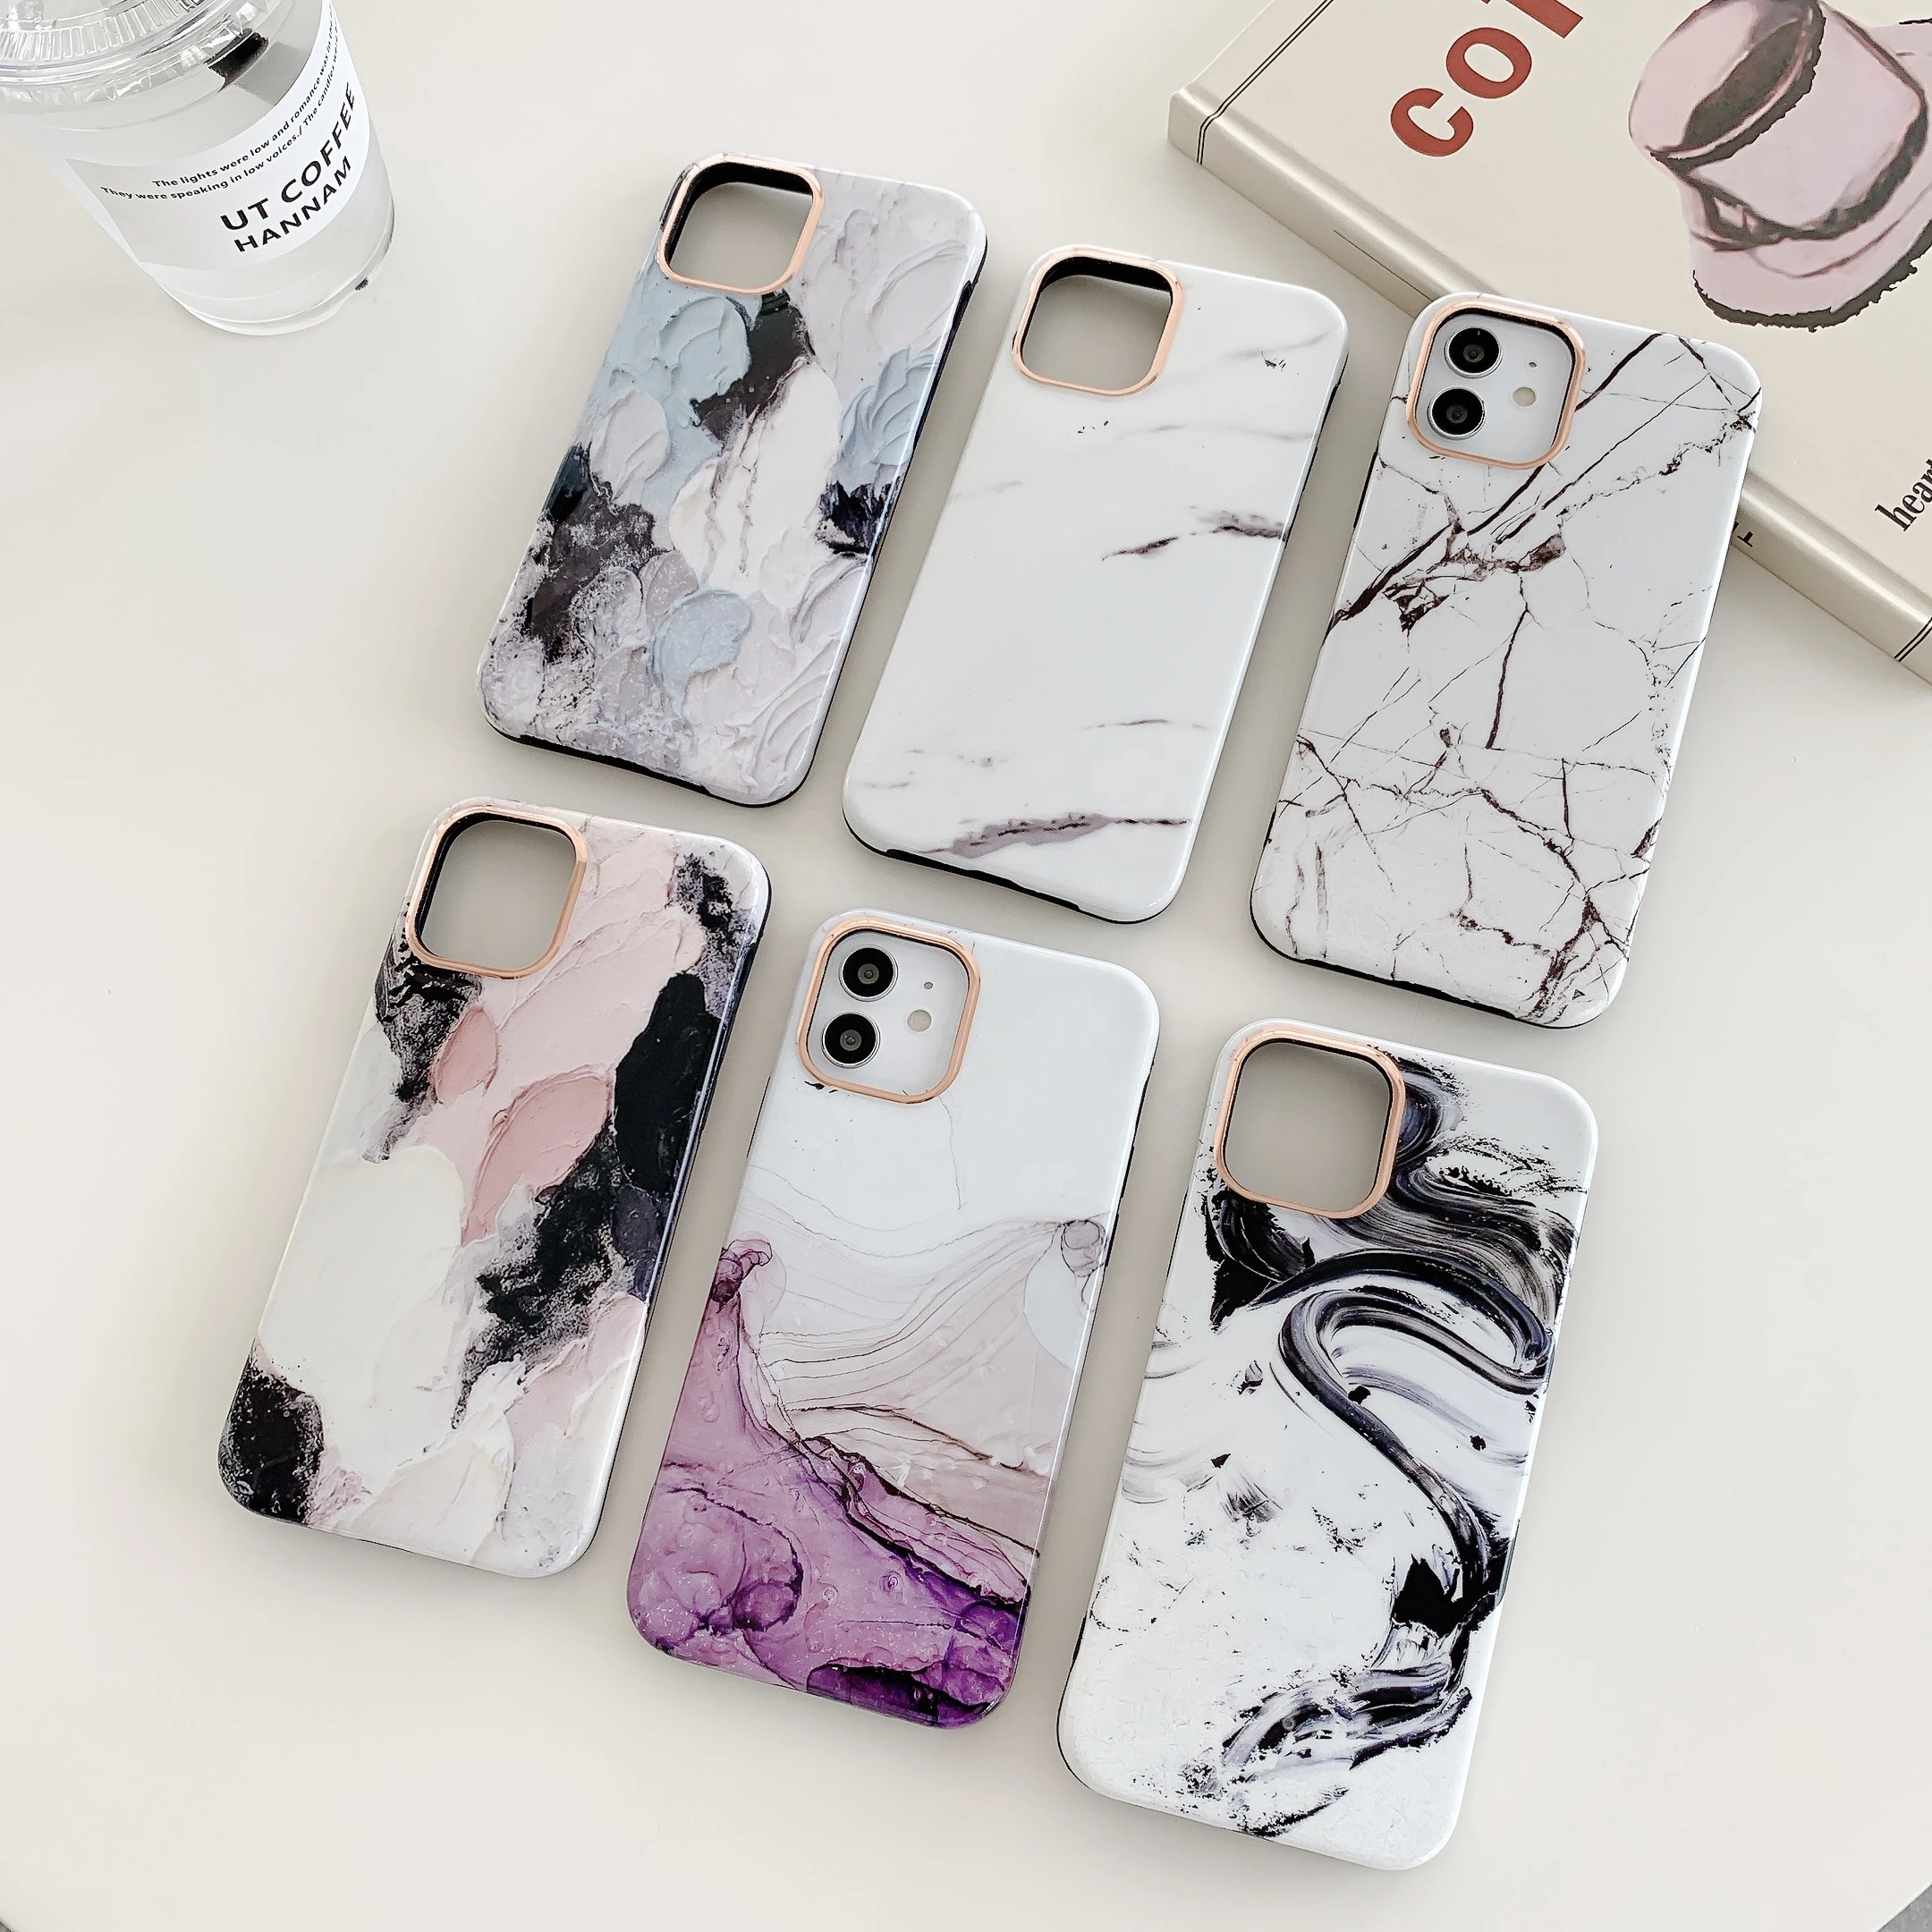 Fashion IMD Oil Painting Soft TPU Mobile Phone Cover Full Protective Cell Phone Case for iPhone 12/11/Xs Max/Xs/Xr/X